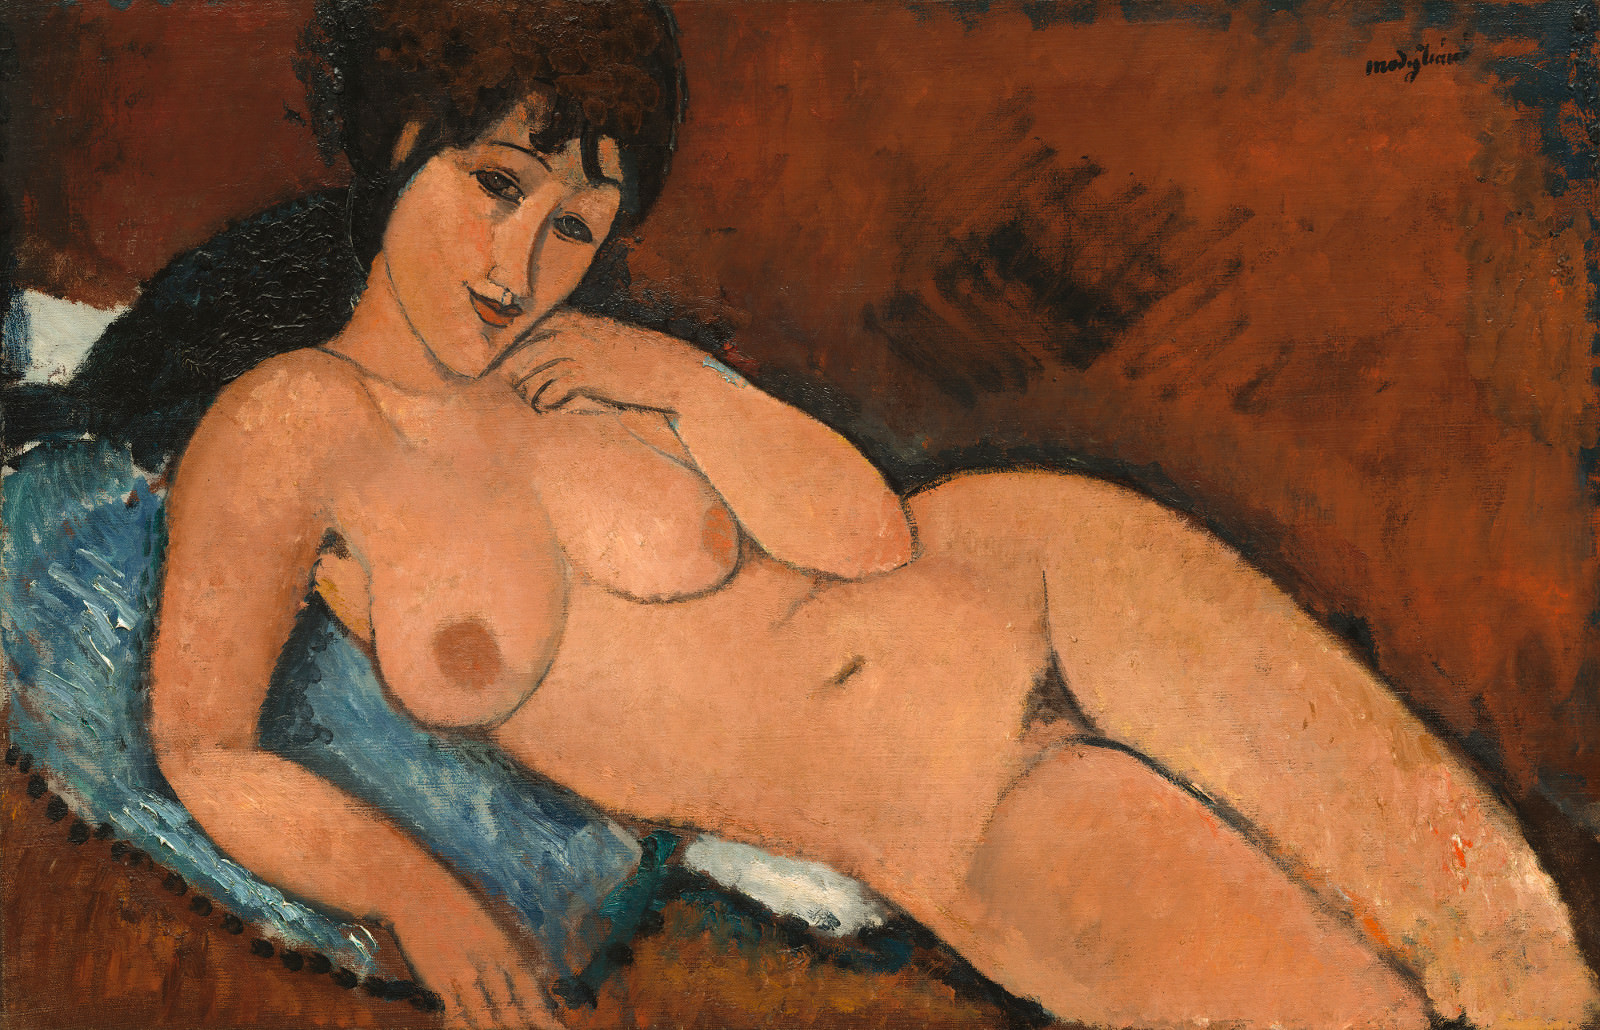 Fig. 9 – Nude on a Blue Cushion, Amedeo Modigliani, 1917, oil on linen, 65.4 x 100.9 cm. National Gallery of Art, Washington. Chester Dale Collection.